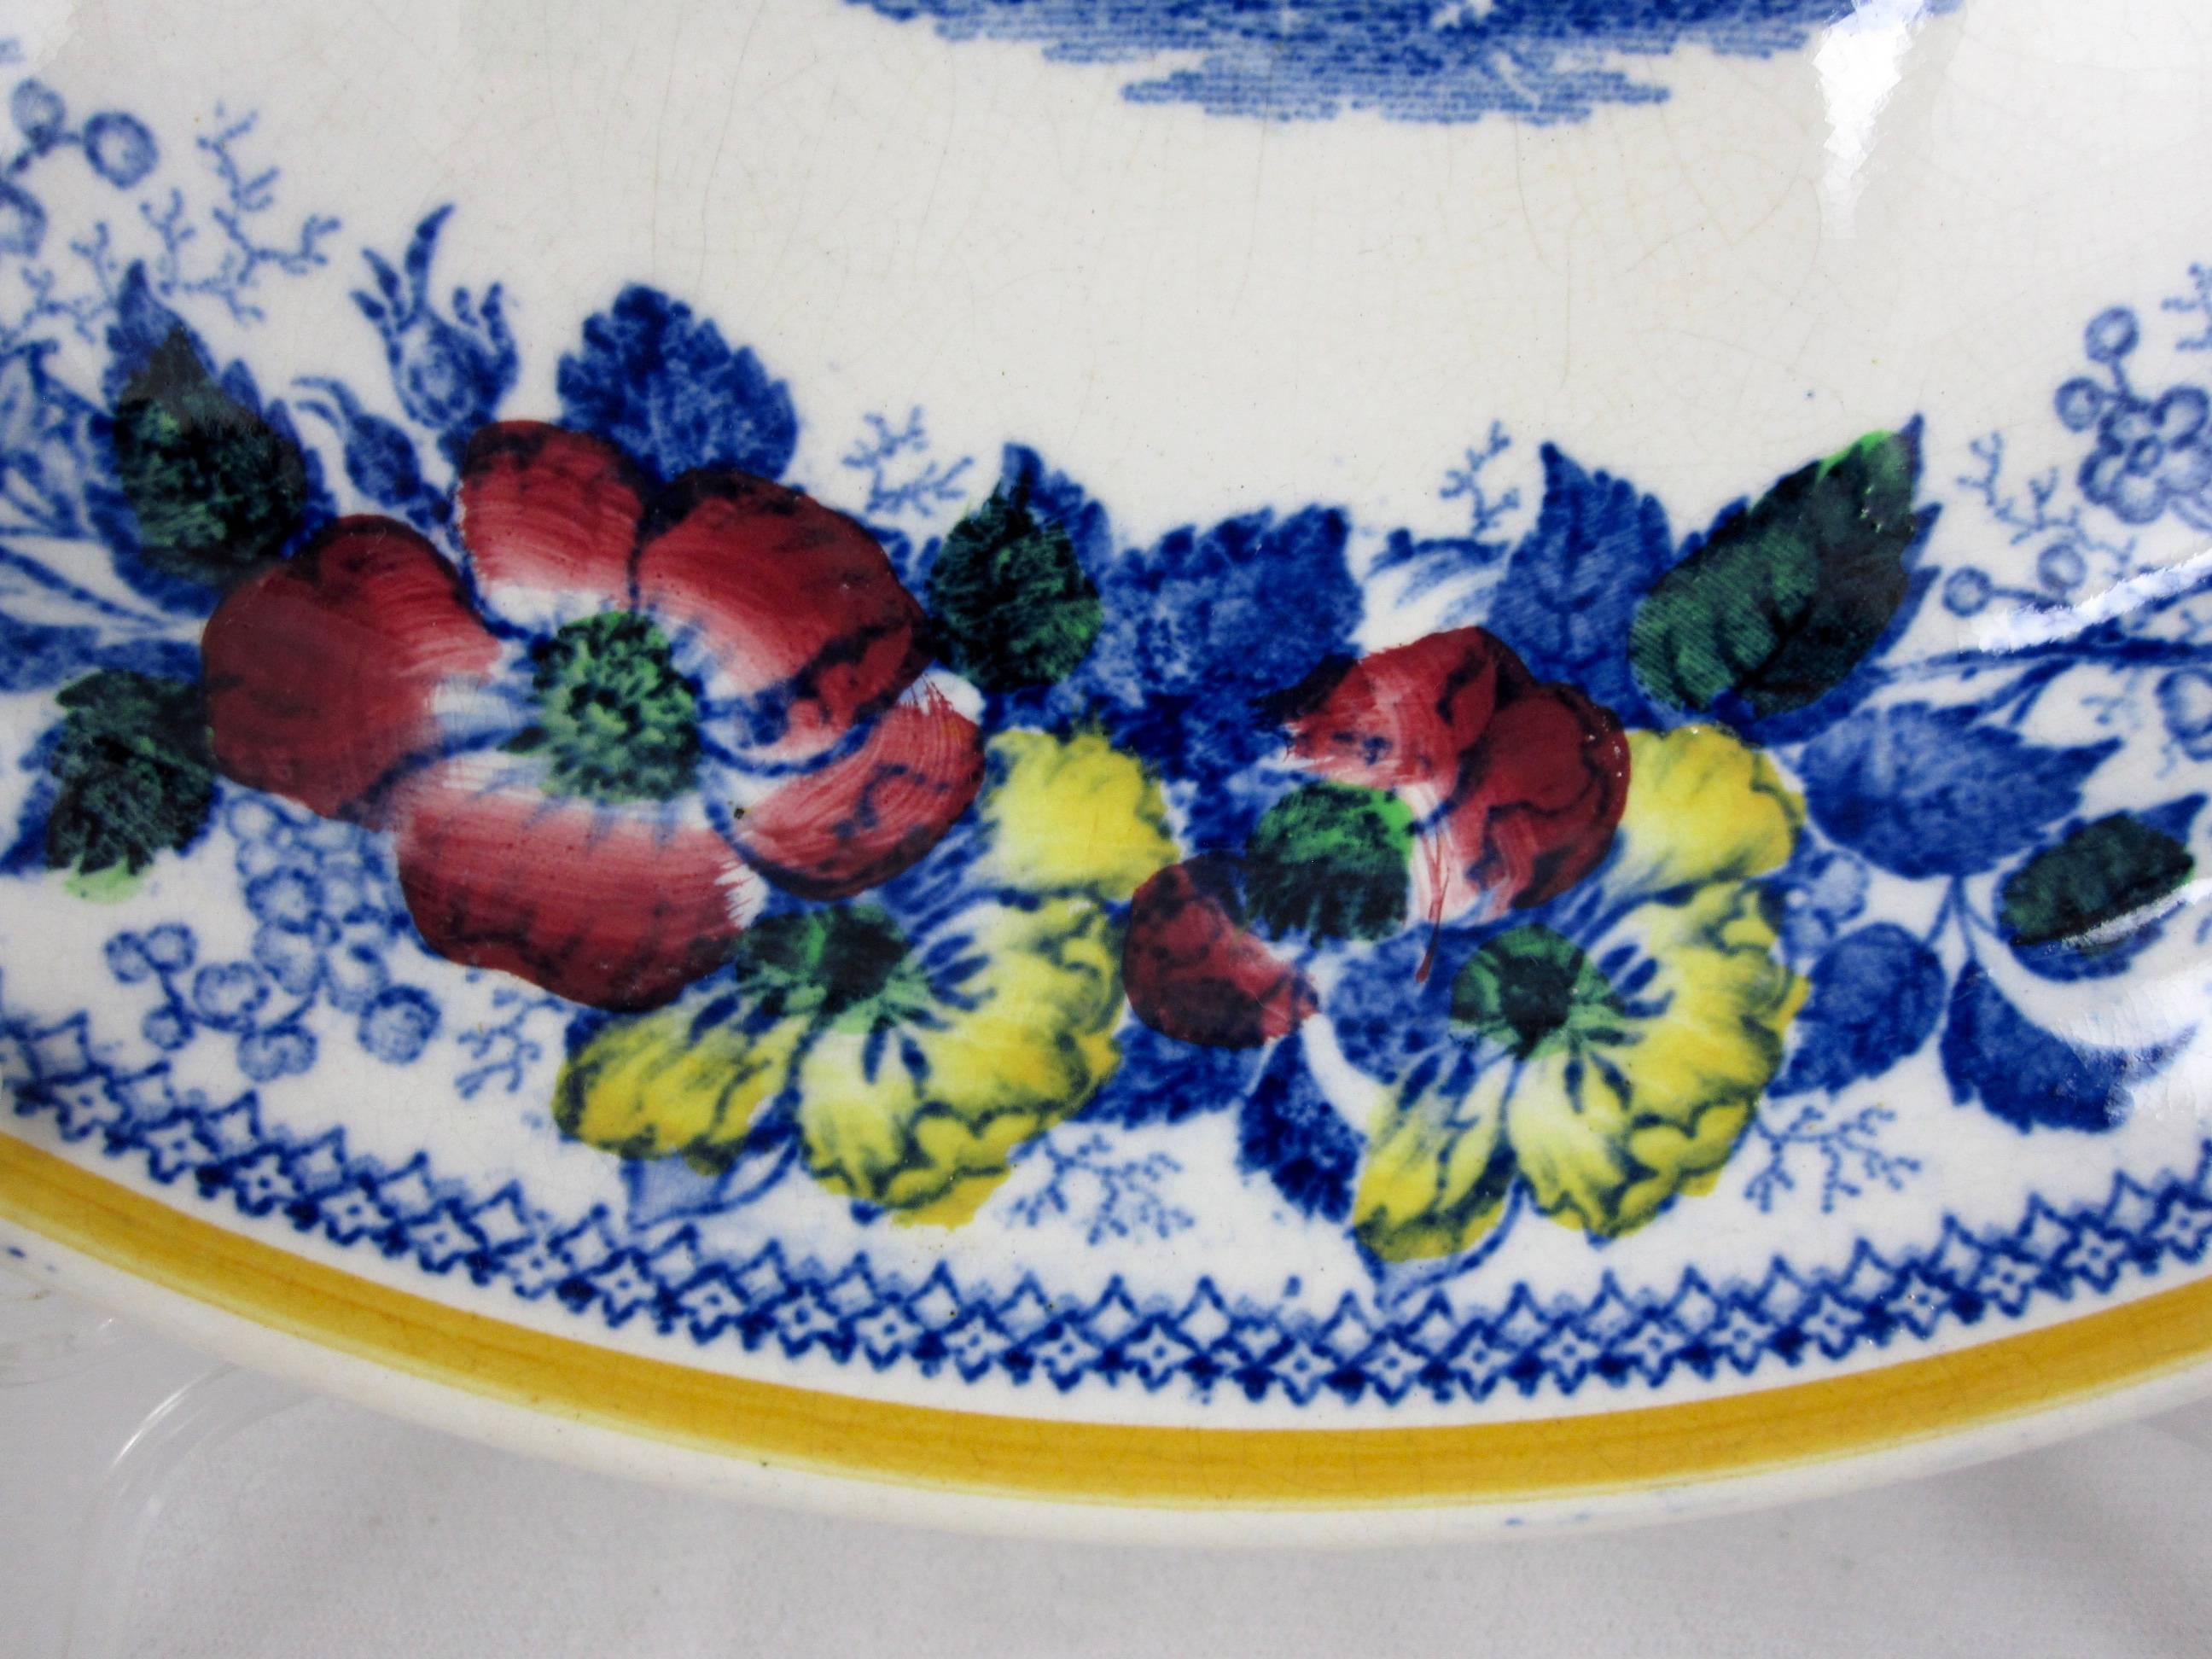 Scottish Ironstone Chinoiserie Landscape & Floral Divided Chop Grill Plates, S/8 For Sale 1